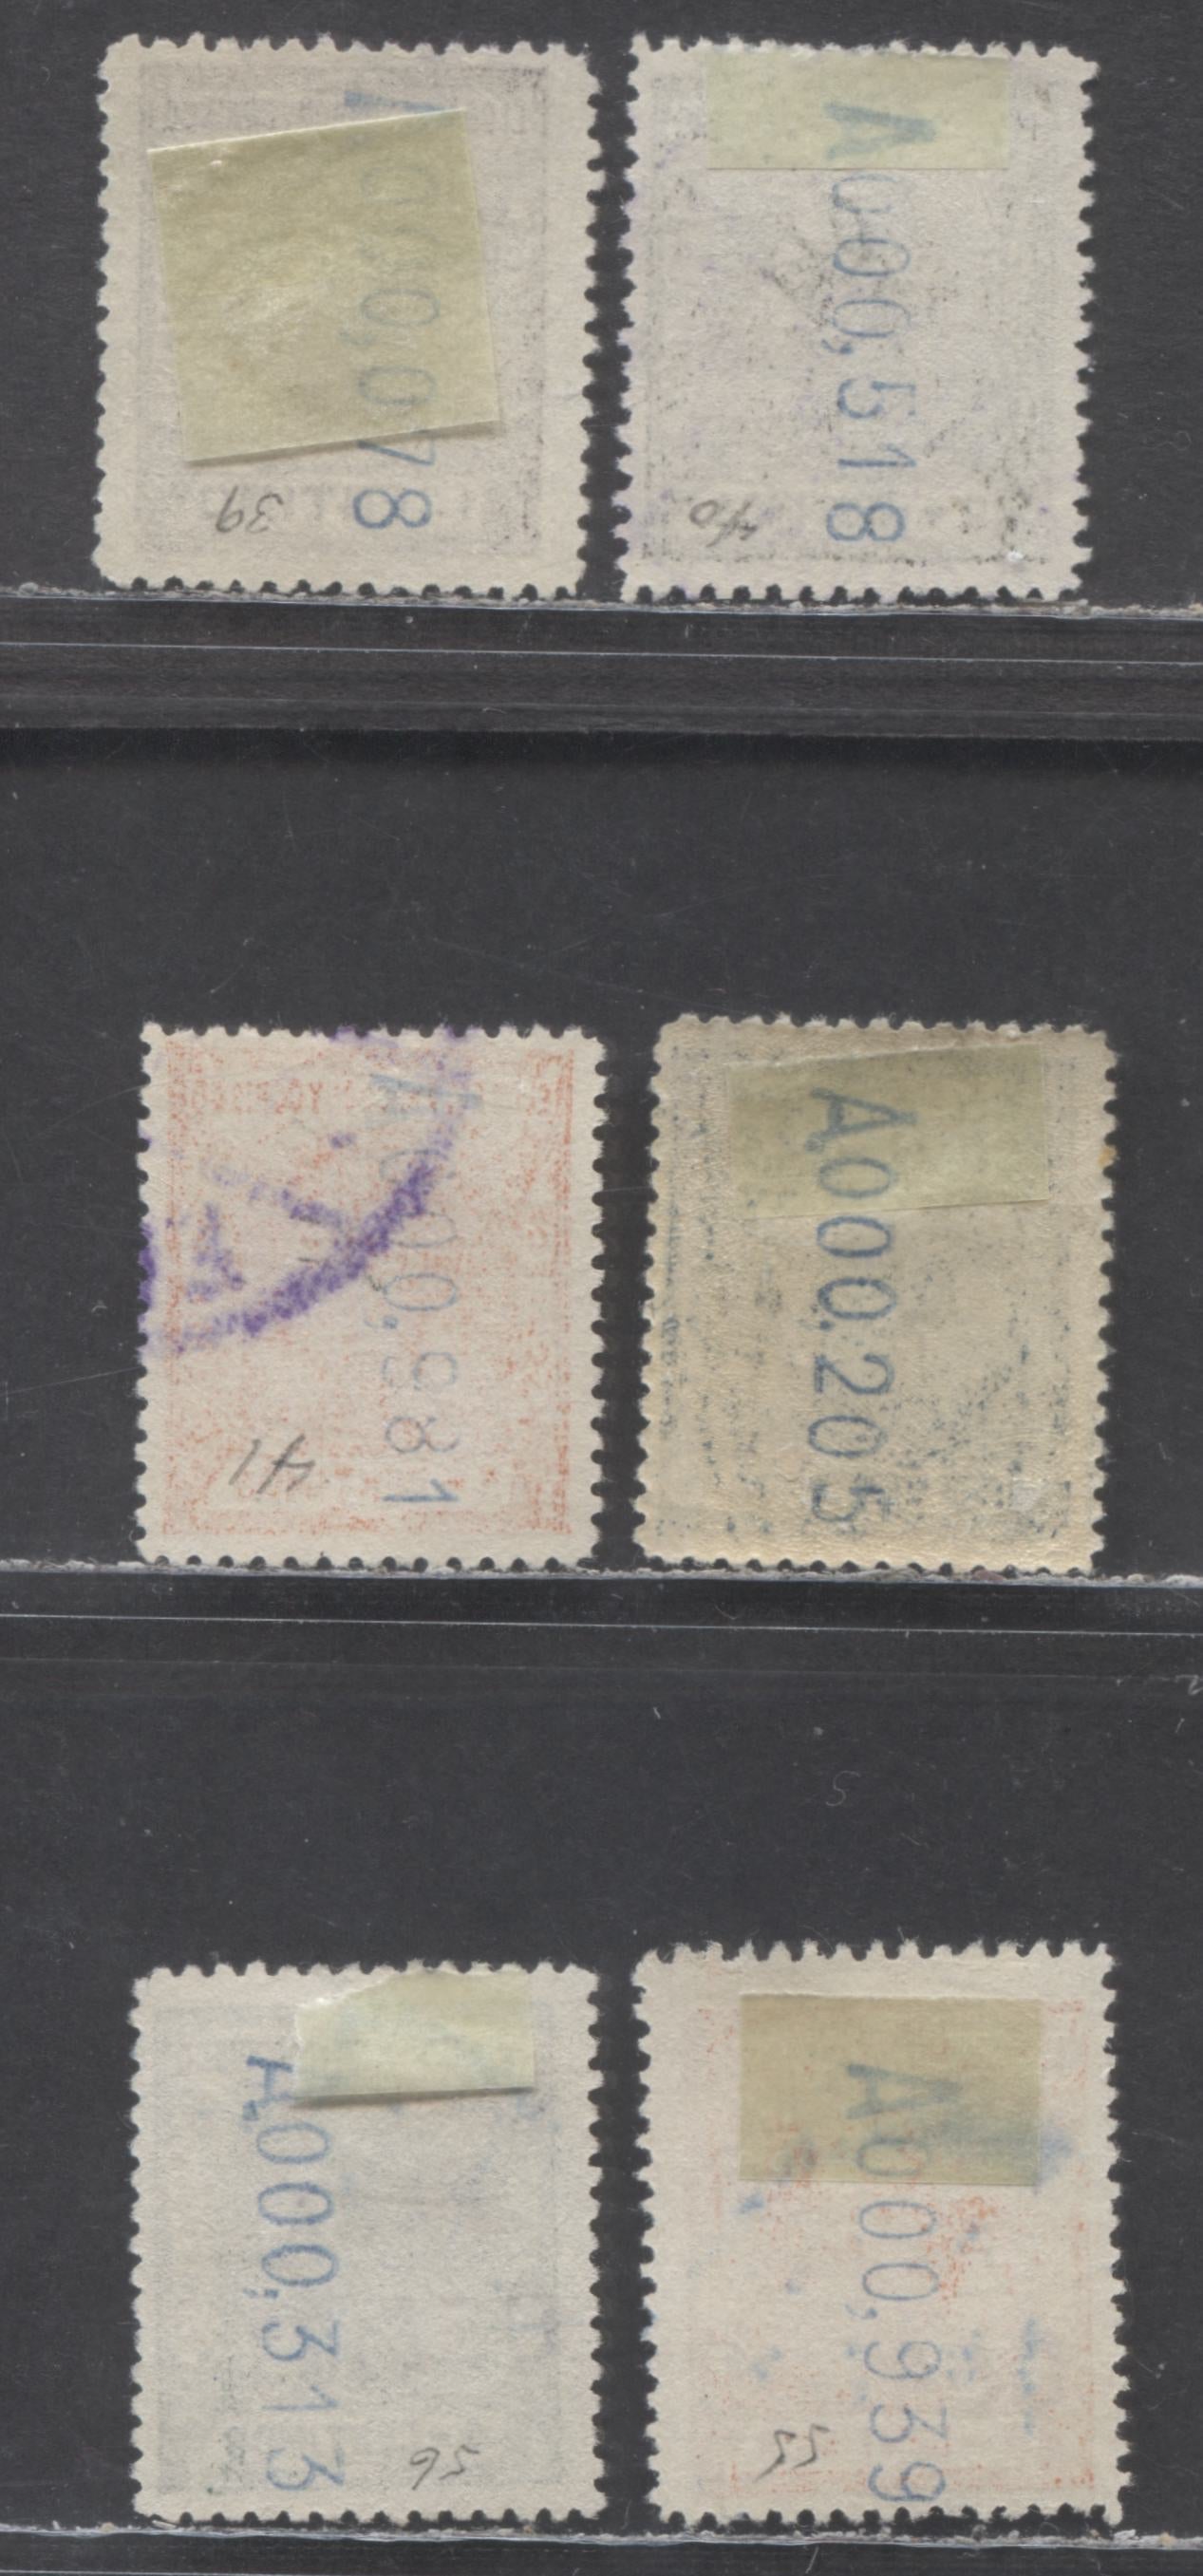 Lot 99 Elobey, Annobon & Corsico SC#39/56 1907 Alfonso XIII & Surcharge Issues, 6 F/VFOG & Used Singles, Click on Listing to See ALL Pictures, 2022 Scott Classic Cat. $5.45